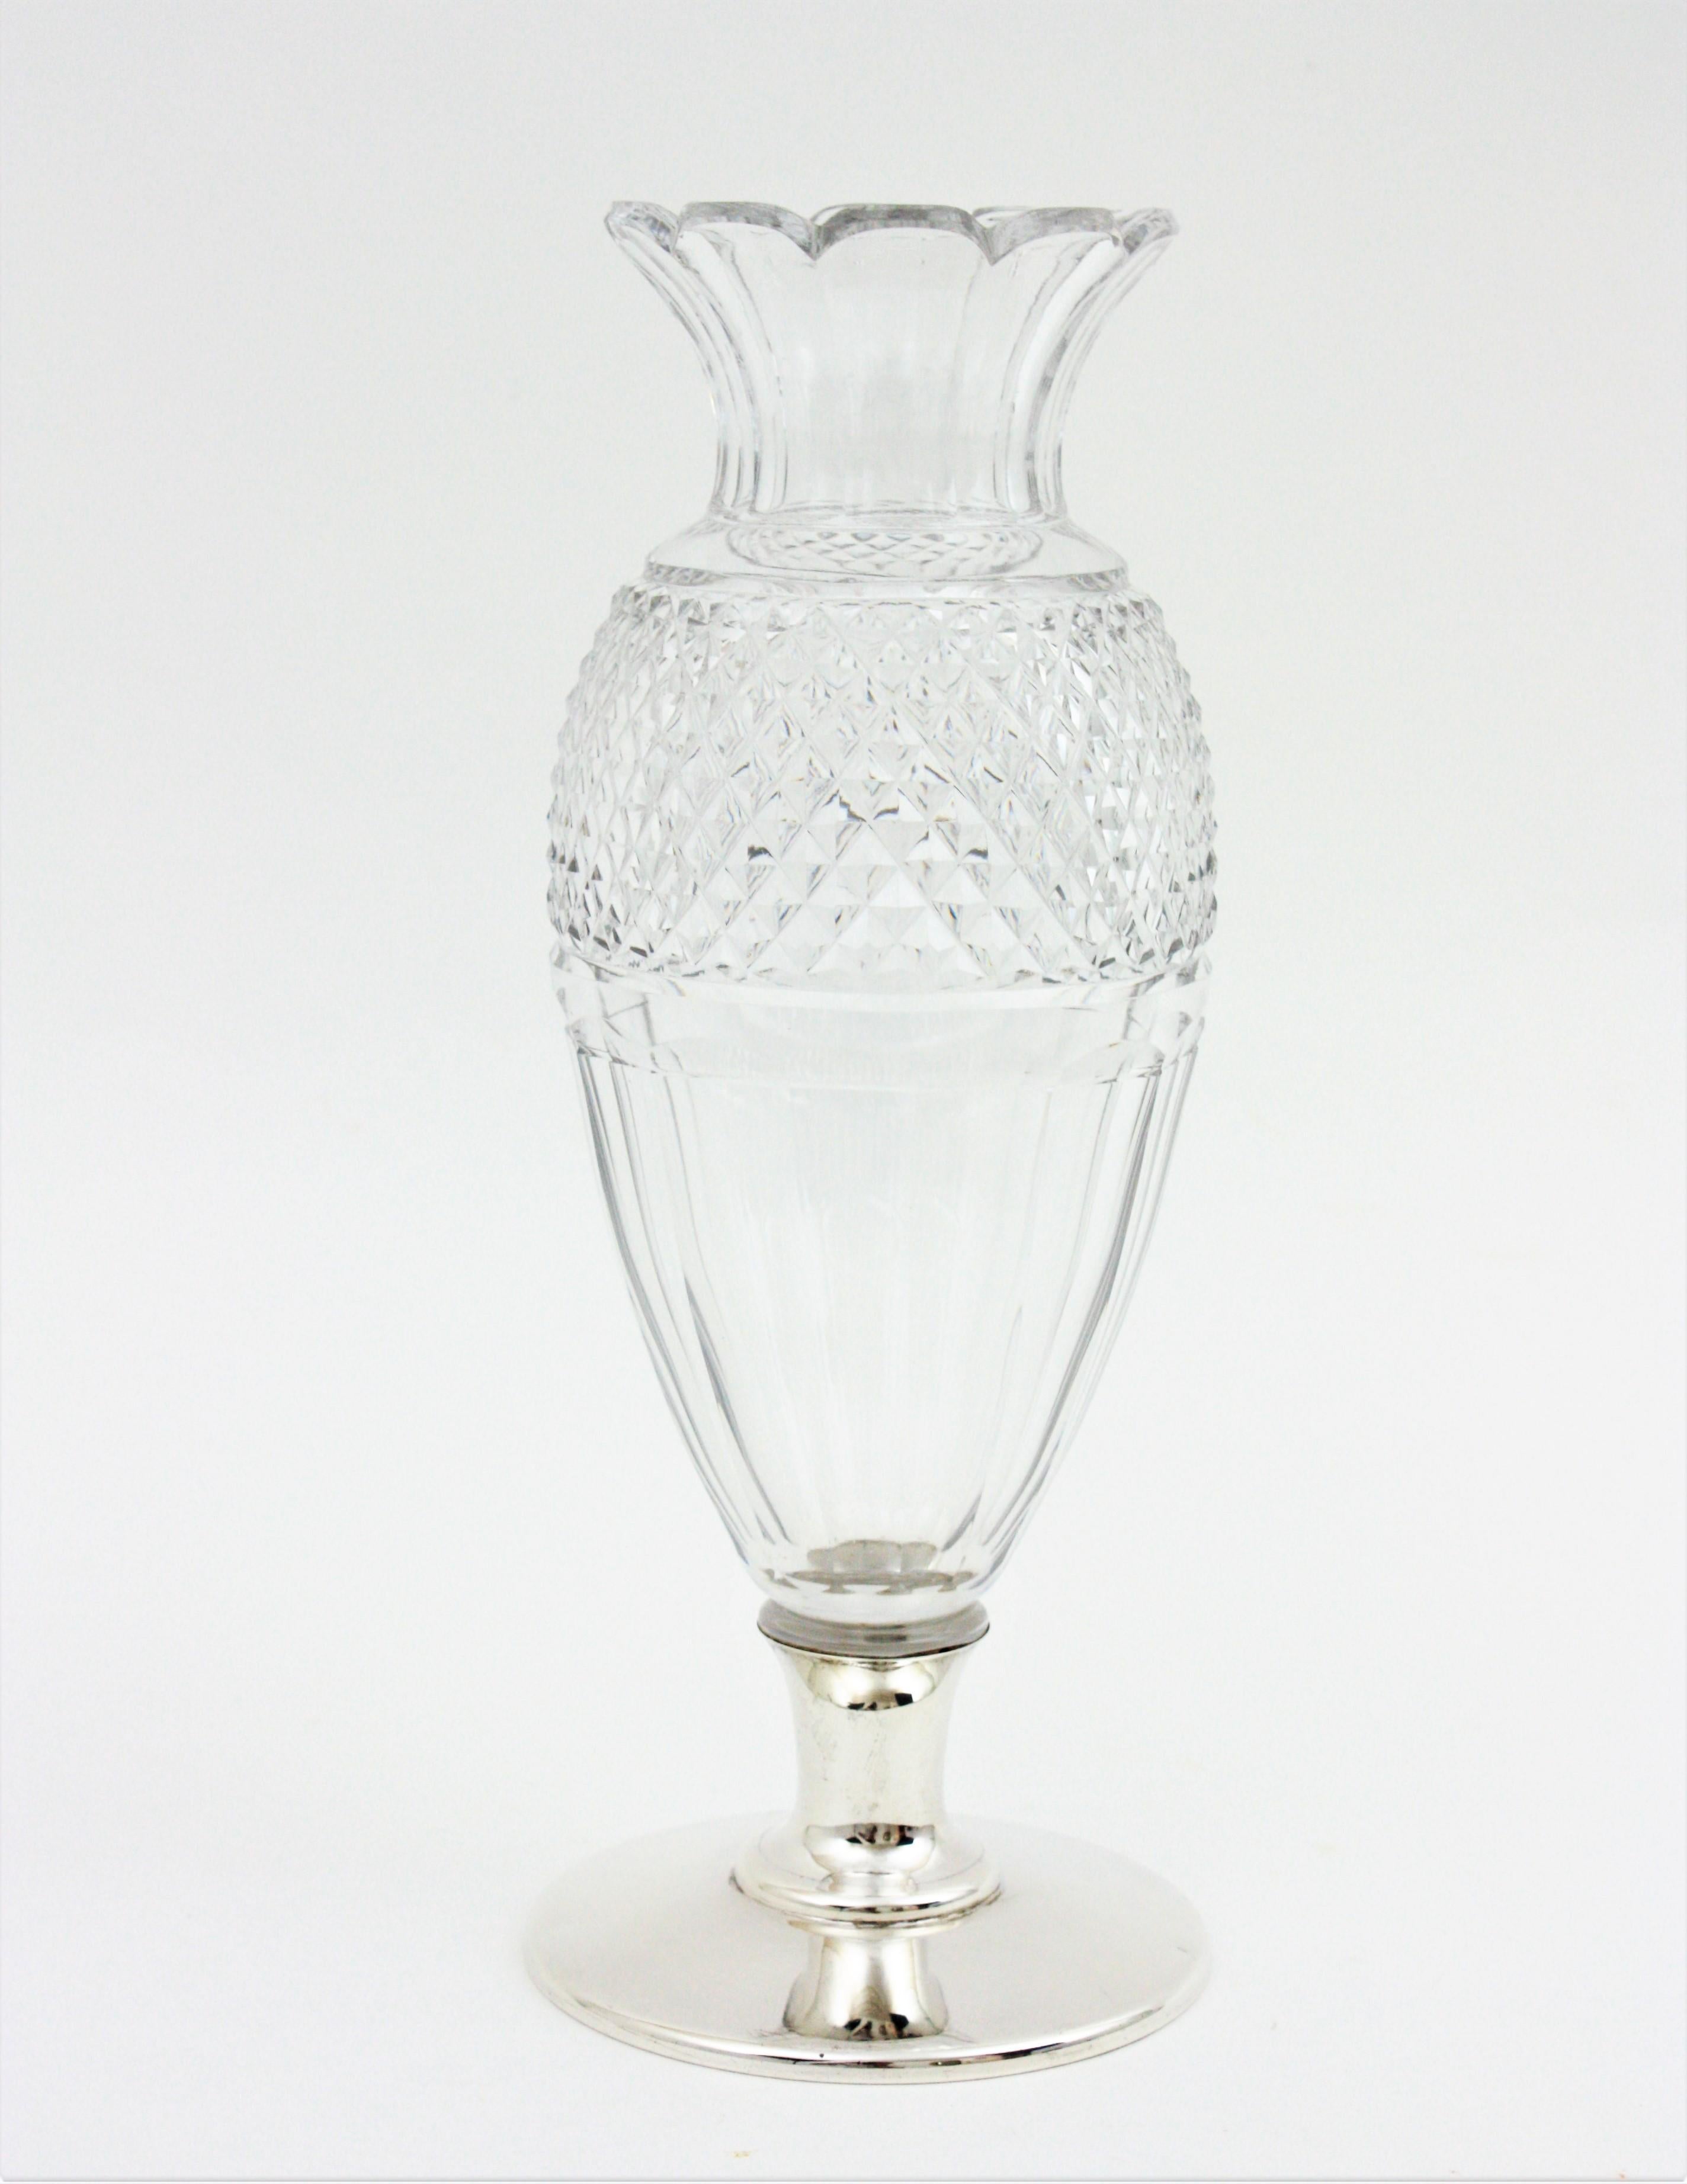 Cut crystal vase with silver base, Spain, 1930s-1940s.
Elegant urn shaped crystal vase manufactured at the late Art Deco period.
Finely executed with very detailed hand-cut crystal patterns thorough. It stands up on a silver base and it has